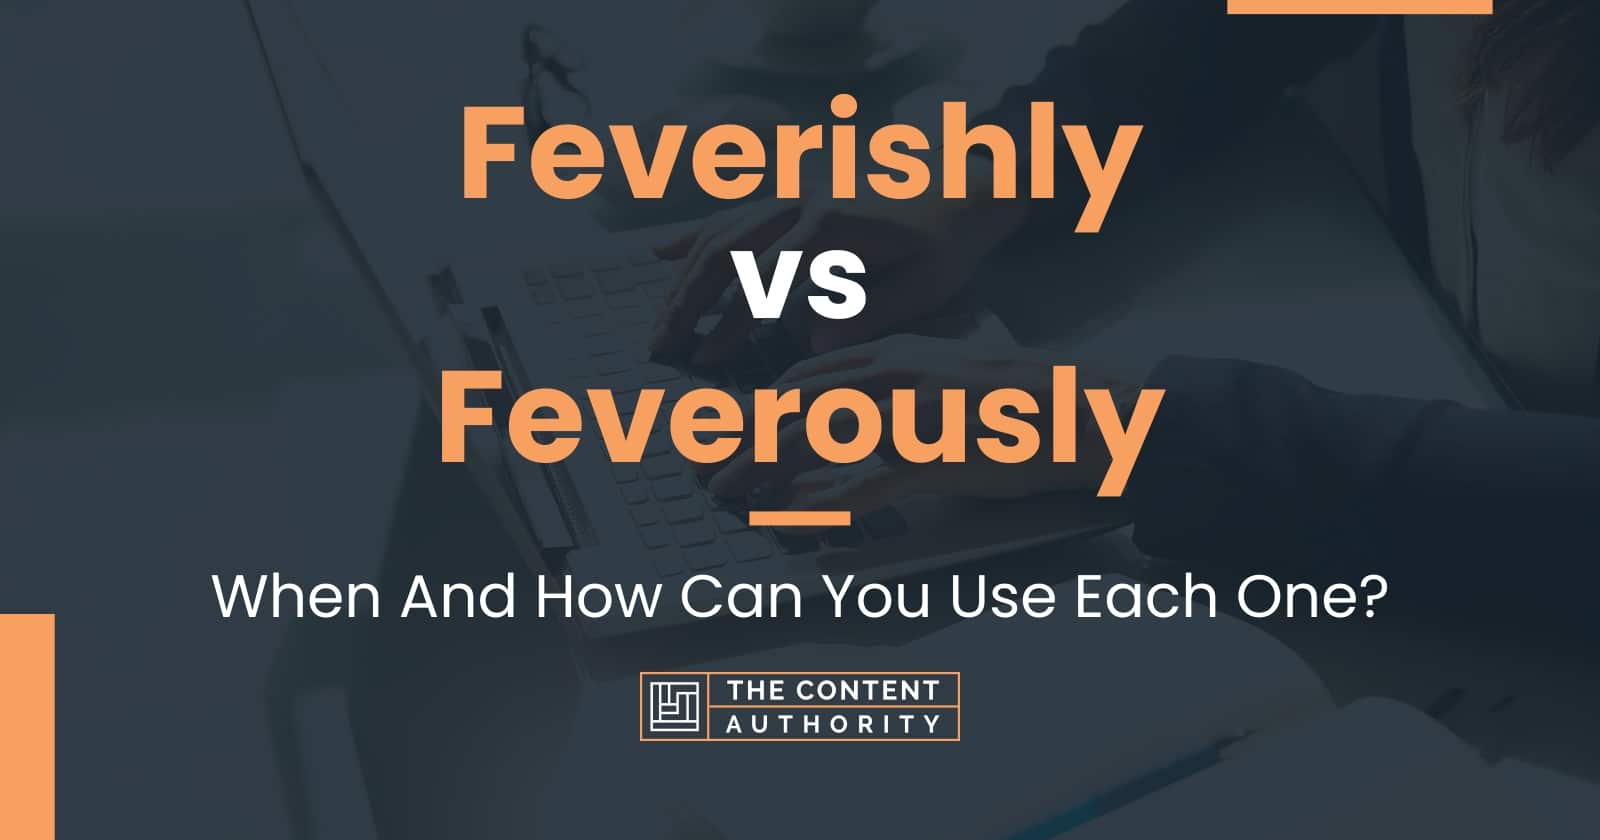 Feverishly vs Feverously When And How Can You Use Each One?